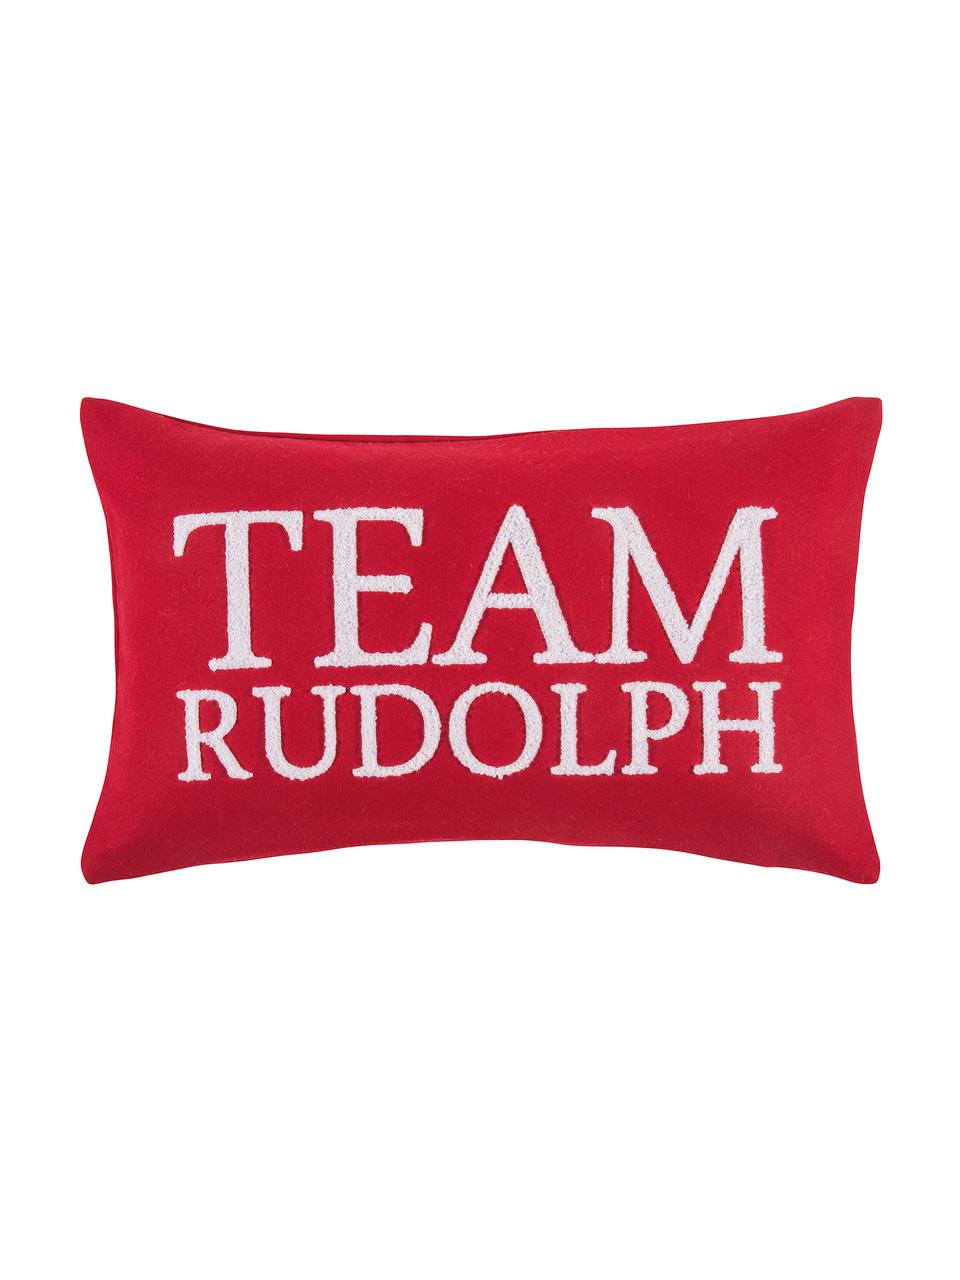 Kussenhoes Rudolph met reliëfopschrift, 60% wol, 40% polyester, Rood, wit, 30 x 50 cm